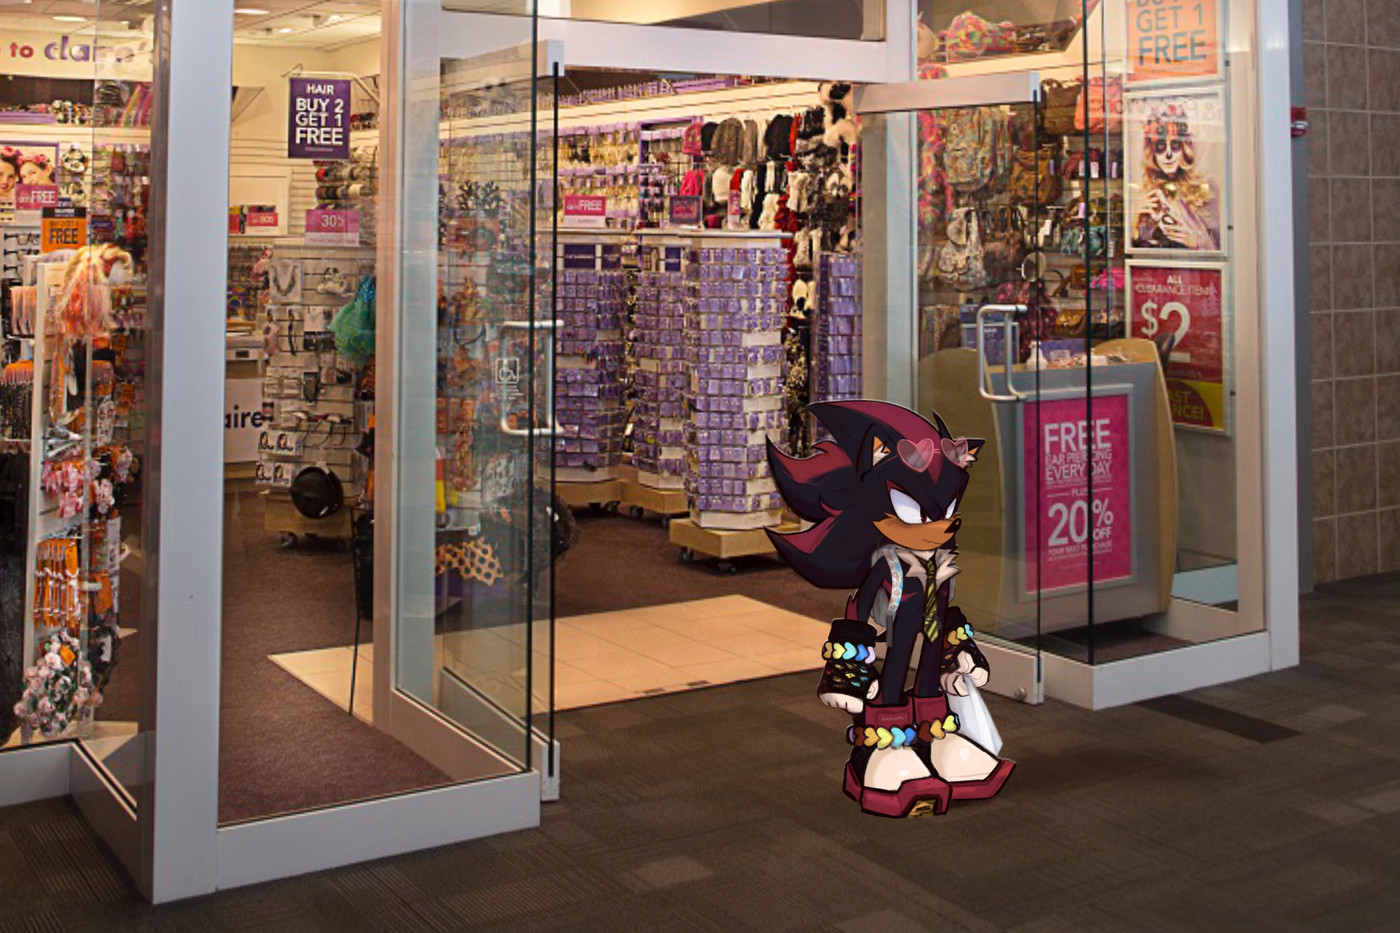 Shadow the Hedgehog went to Claire's and inspired a new meme trend